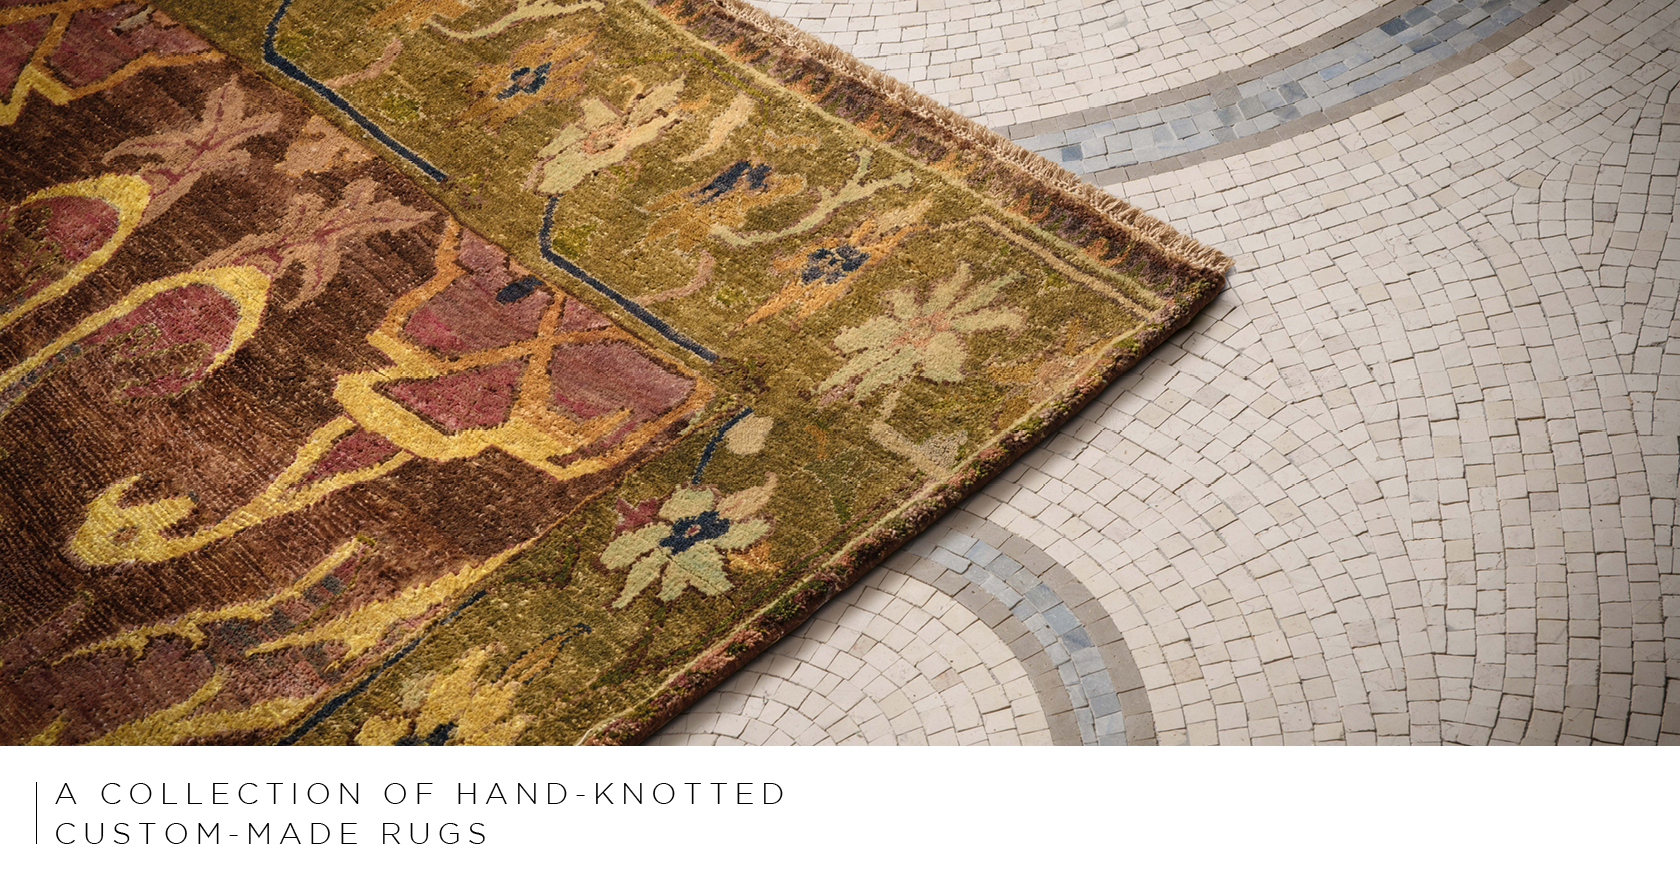 Lapicida DI VITA homes and lifestyles collection includes hand-knotted rugs